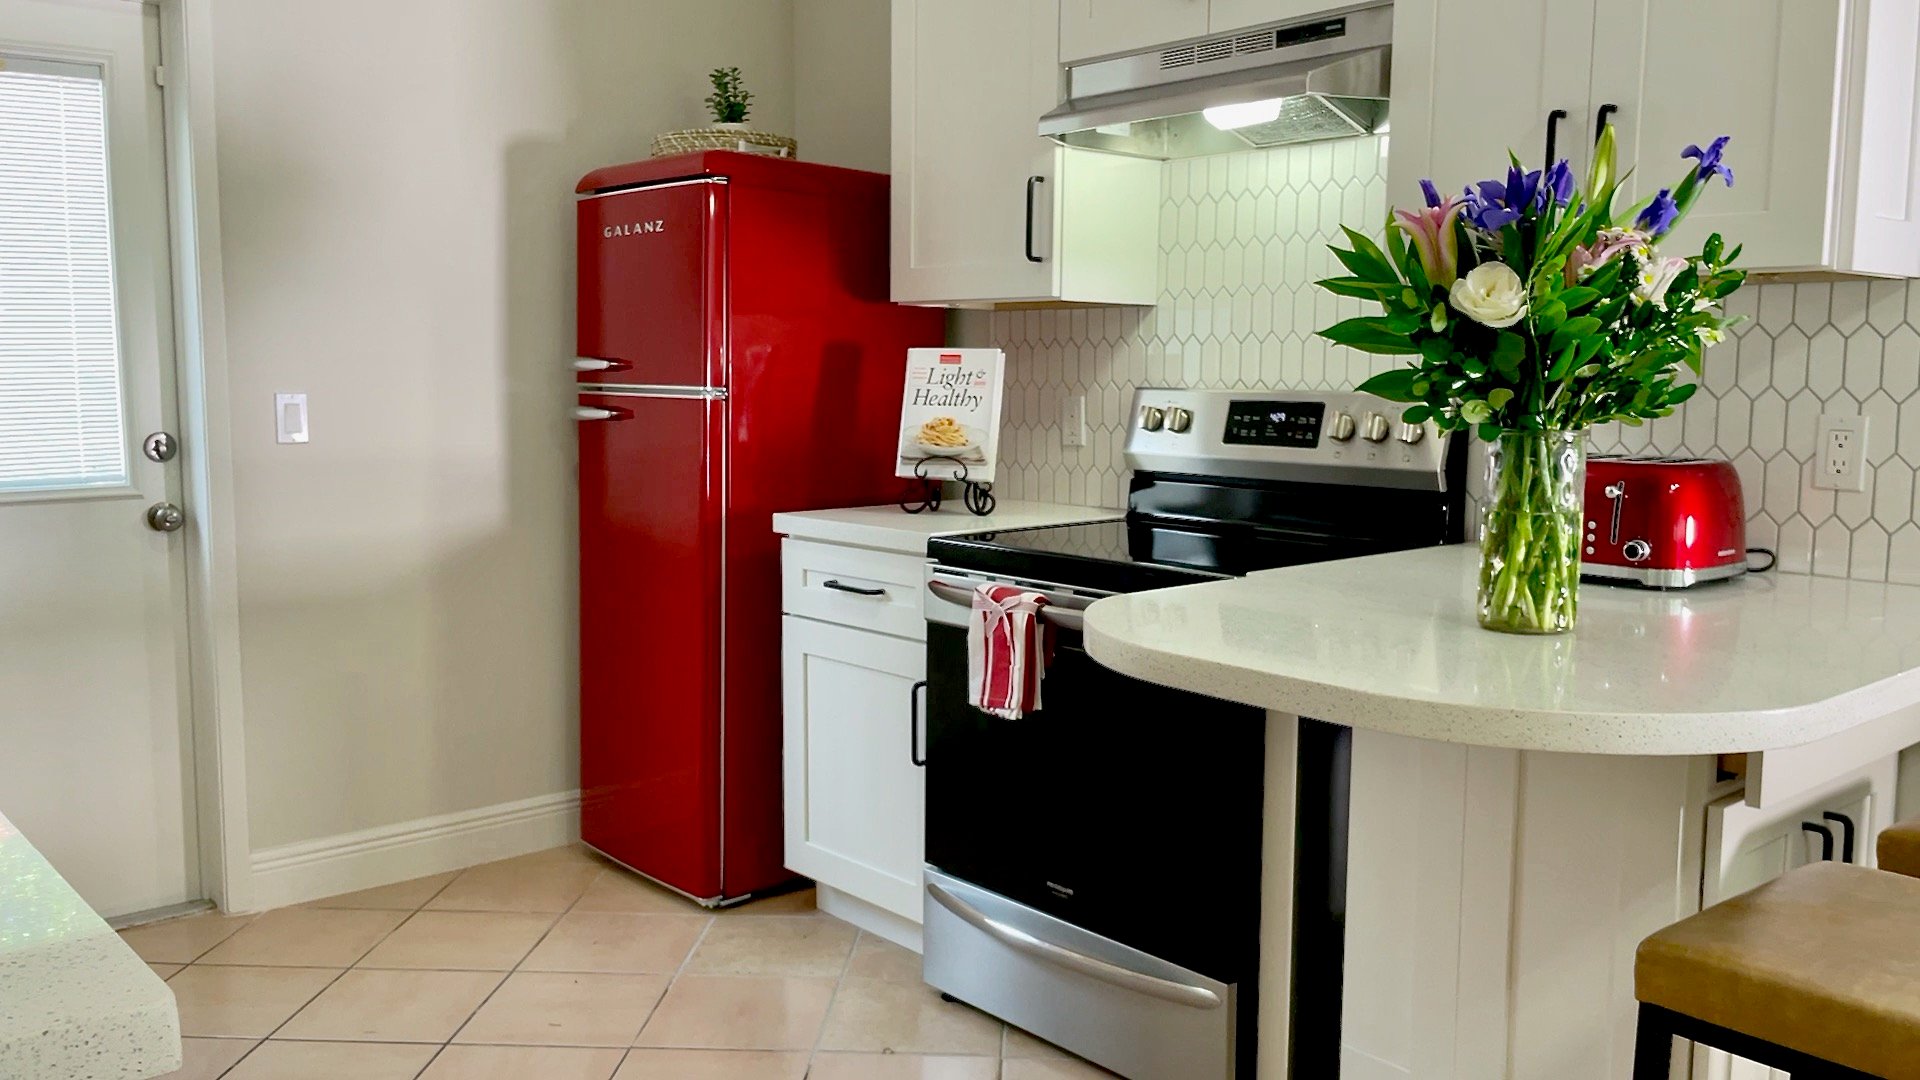 The appliances in the kitchen are modern, and have been updated recently!